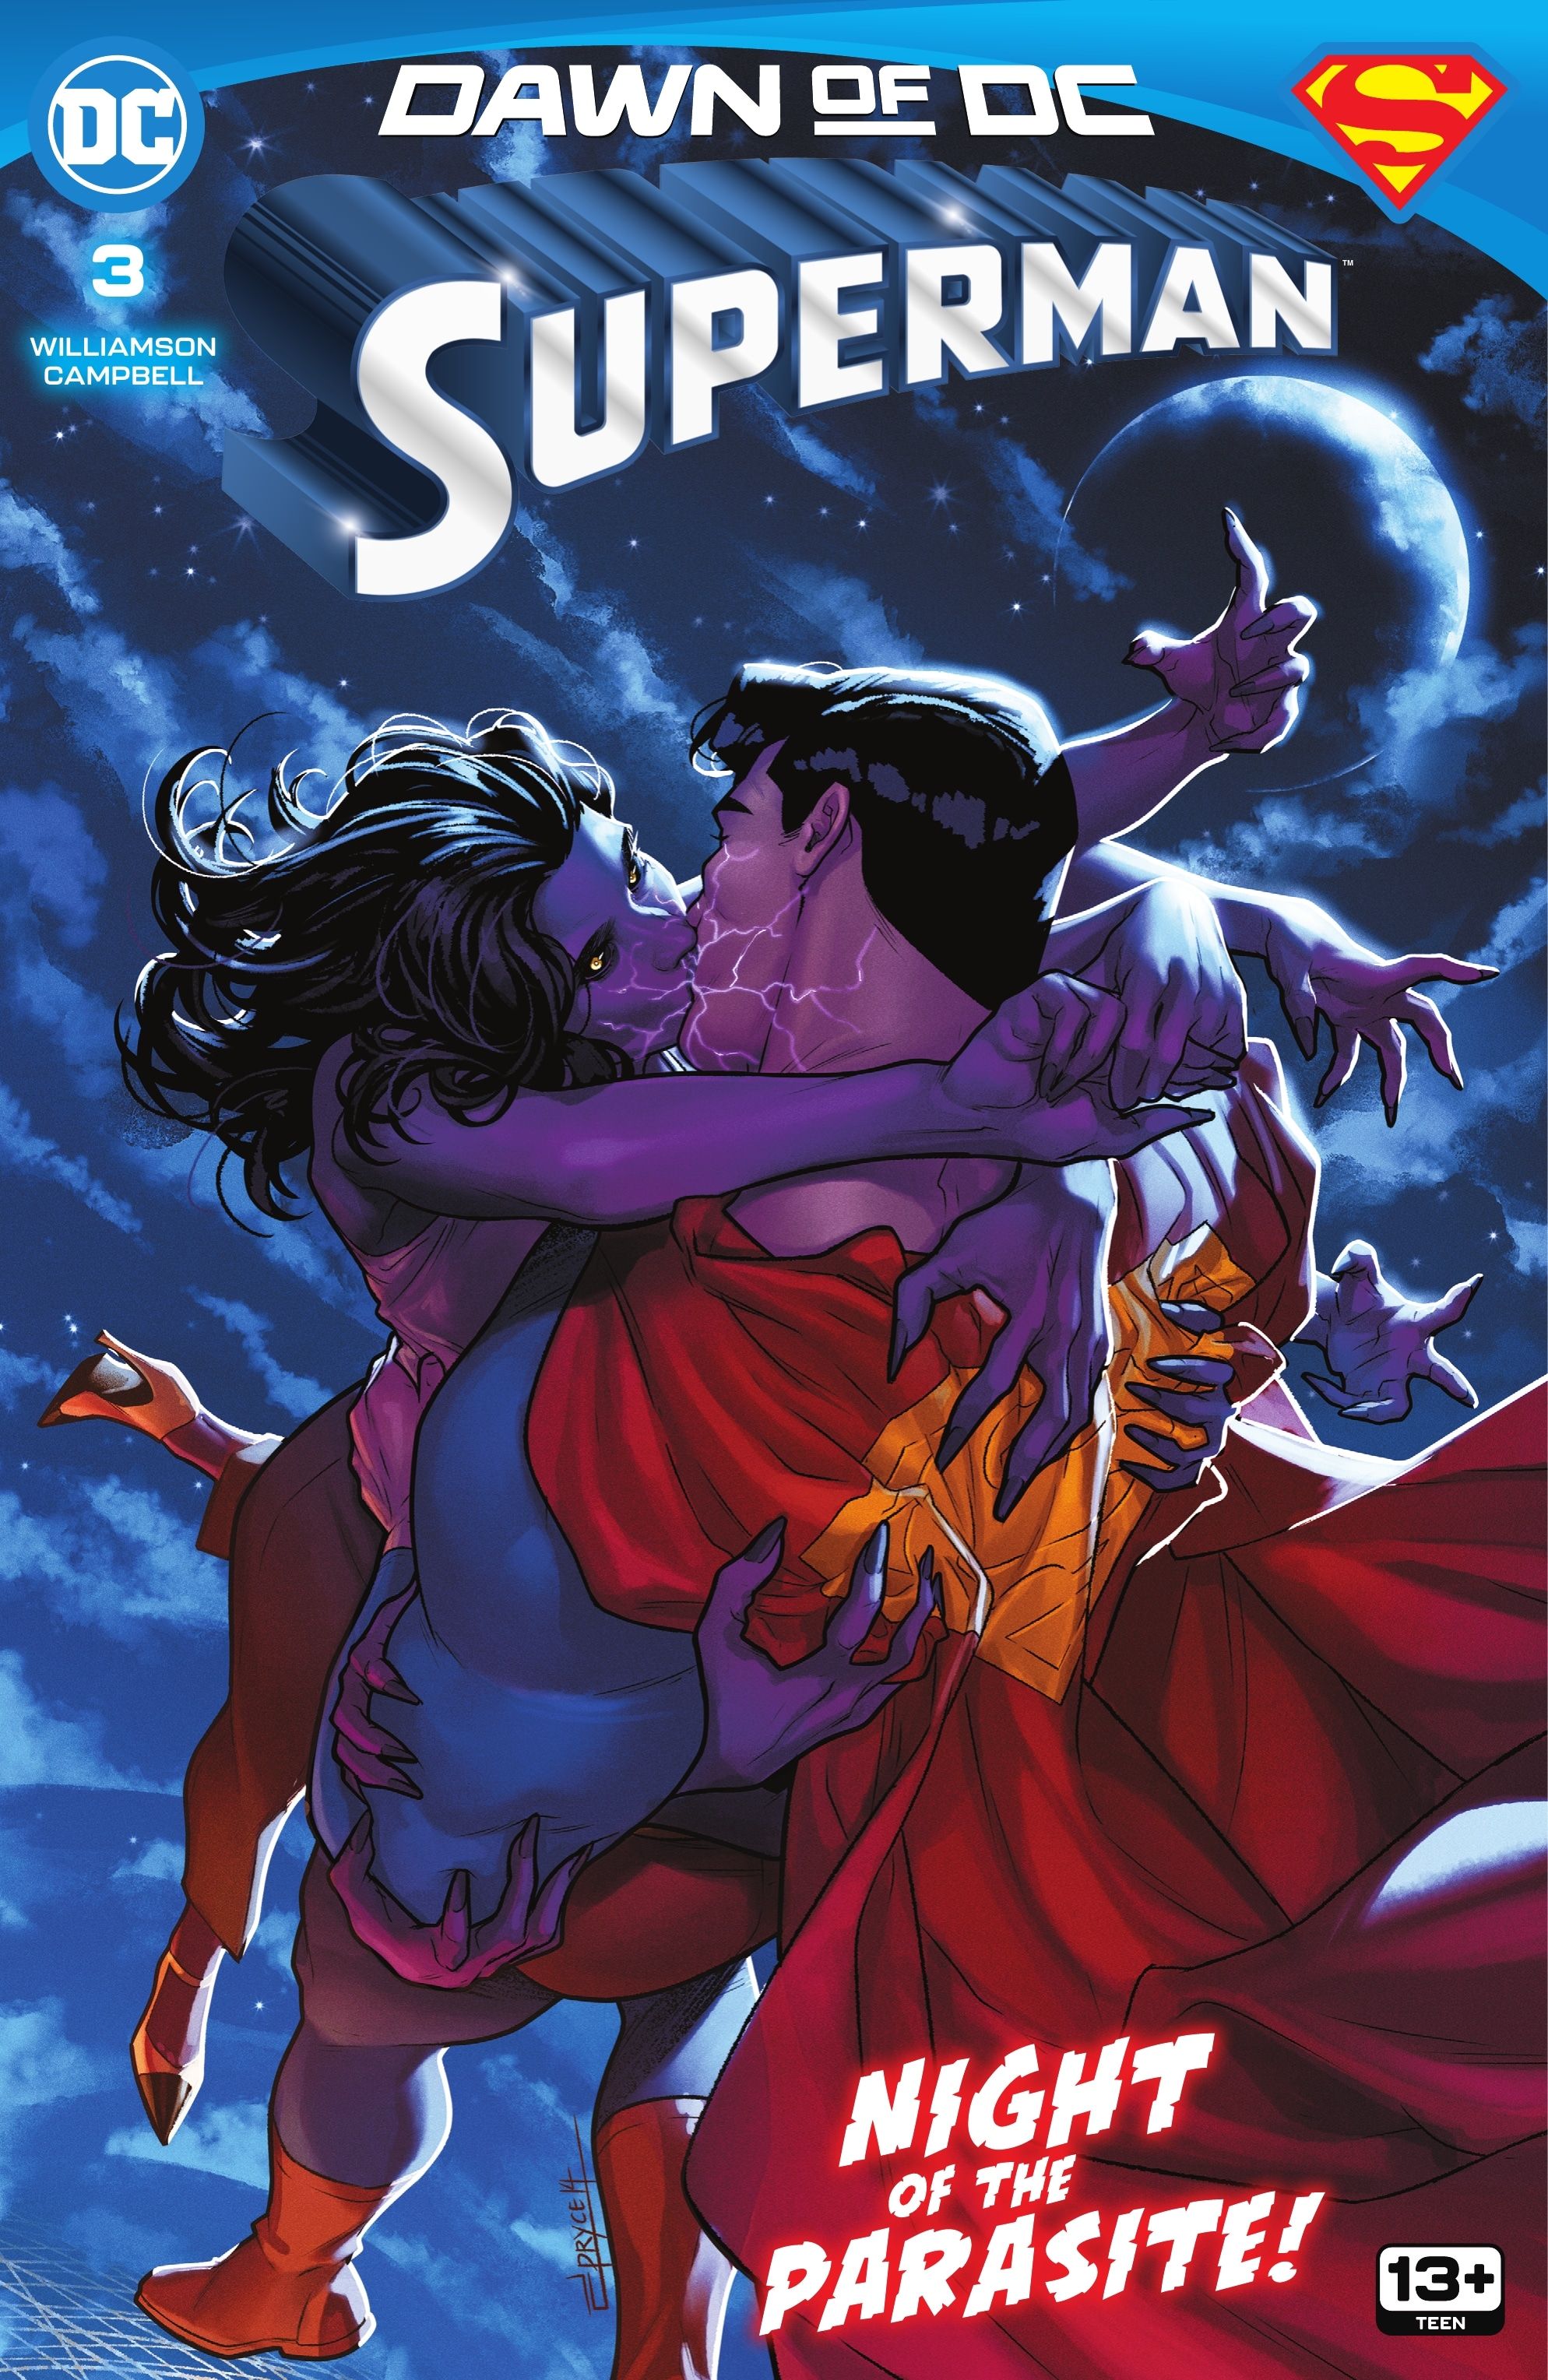 Superman and Lois Lane Kiss in the air on the cover of Superman #3